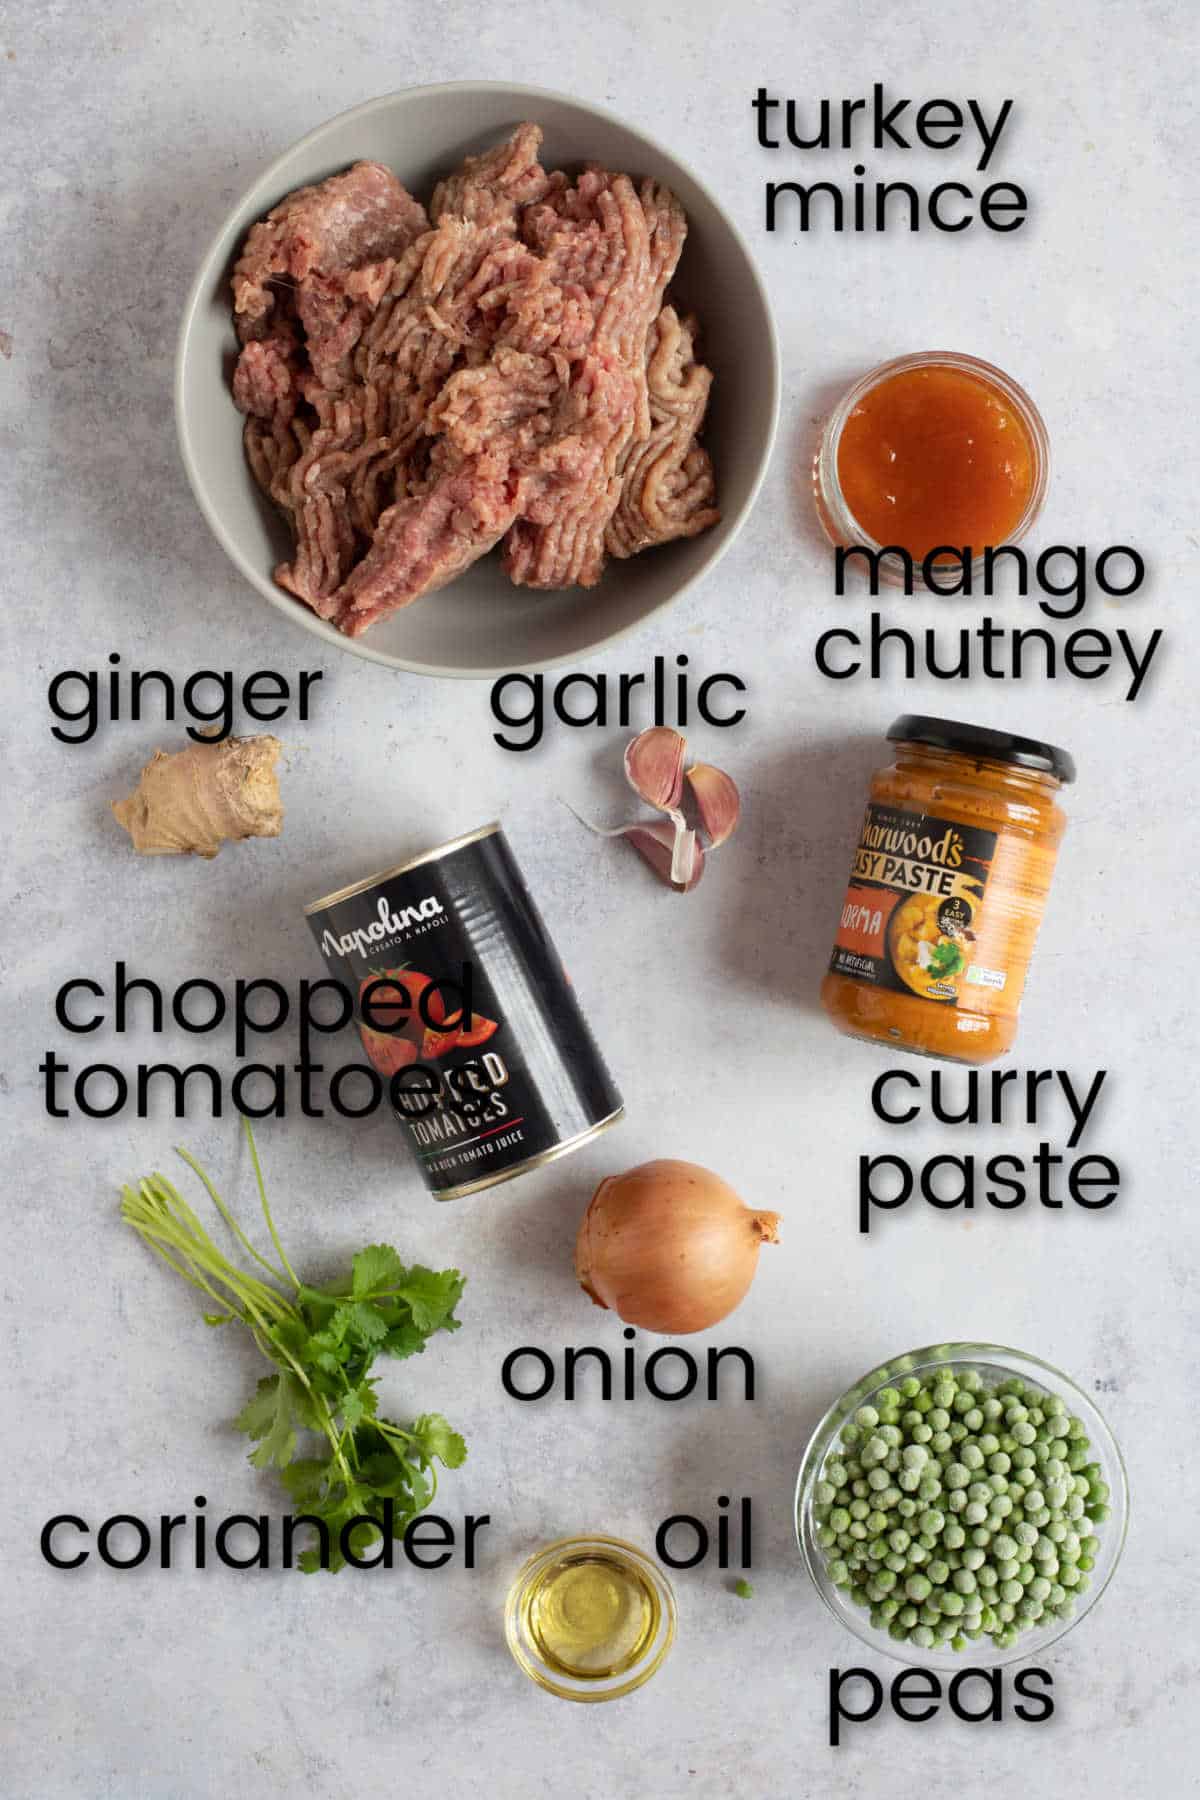 Ingredients for turkey mince curry.